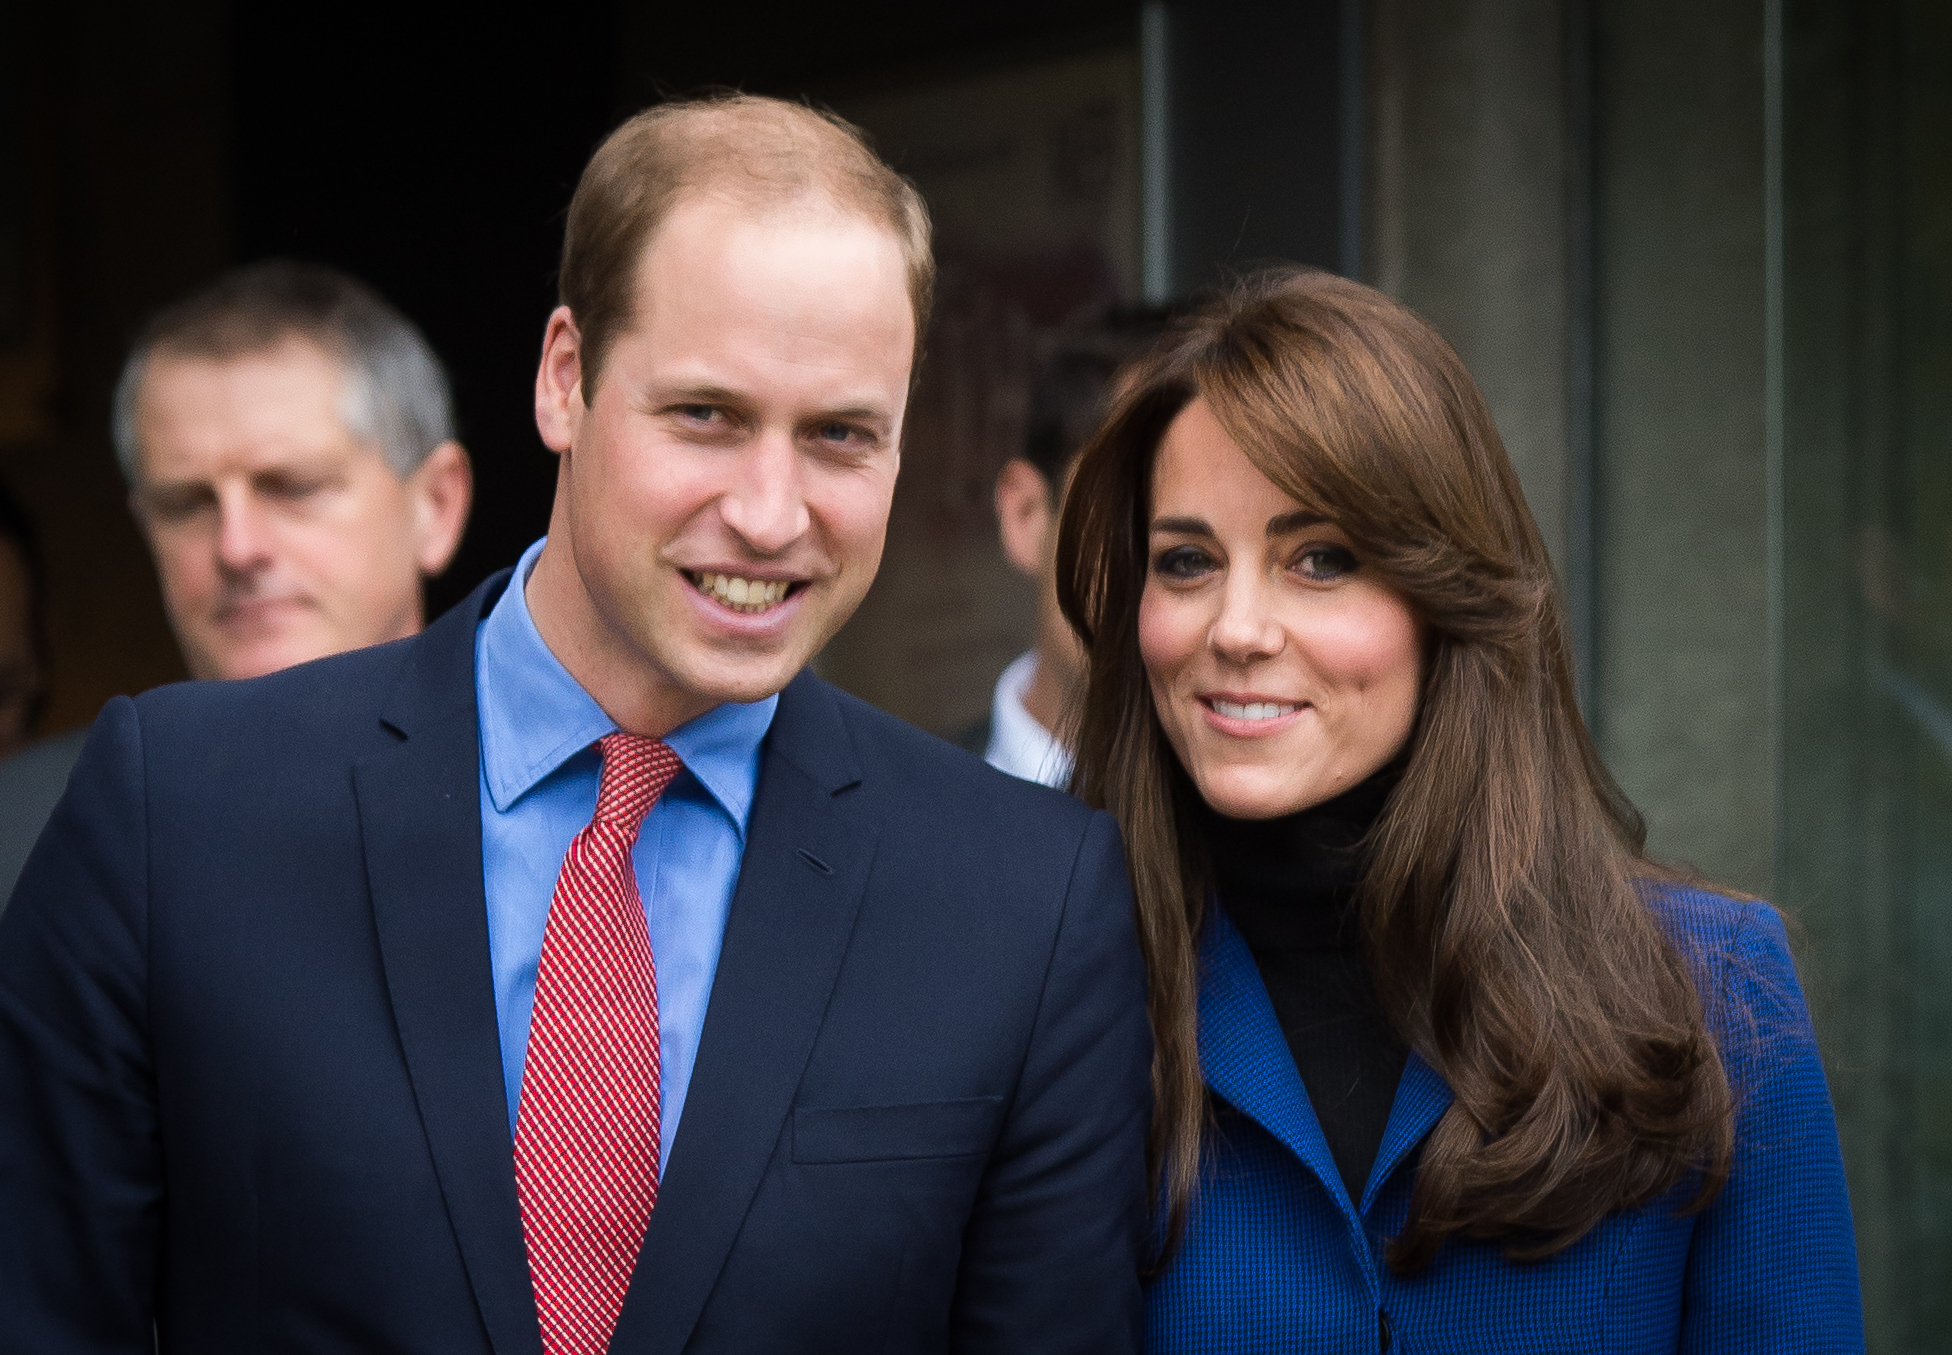 Catherine, Duchess of Cambridge and Prince William, Duke of Cambridge visit Dundee Rep. Theatre on October 23, 2015 in Dundee, Scotland.